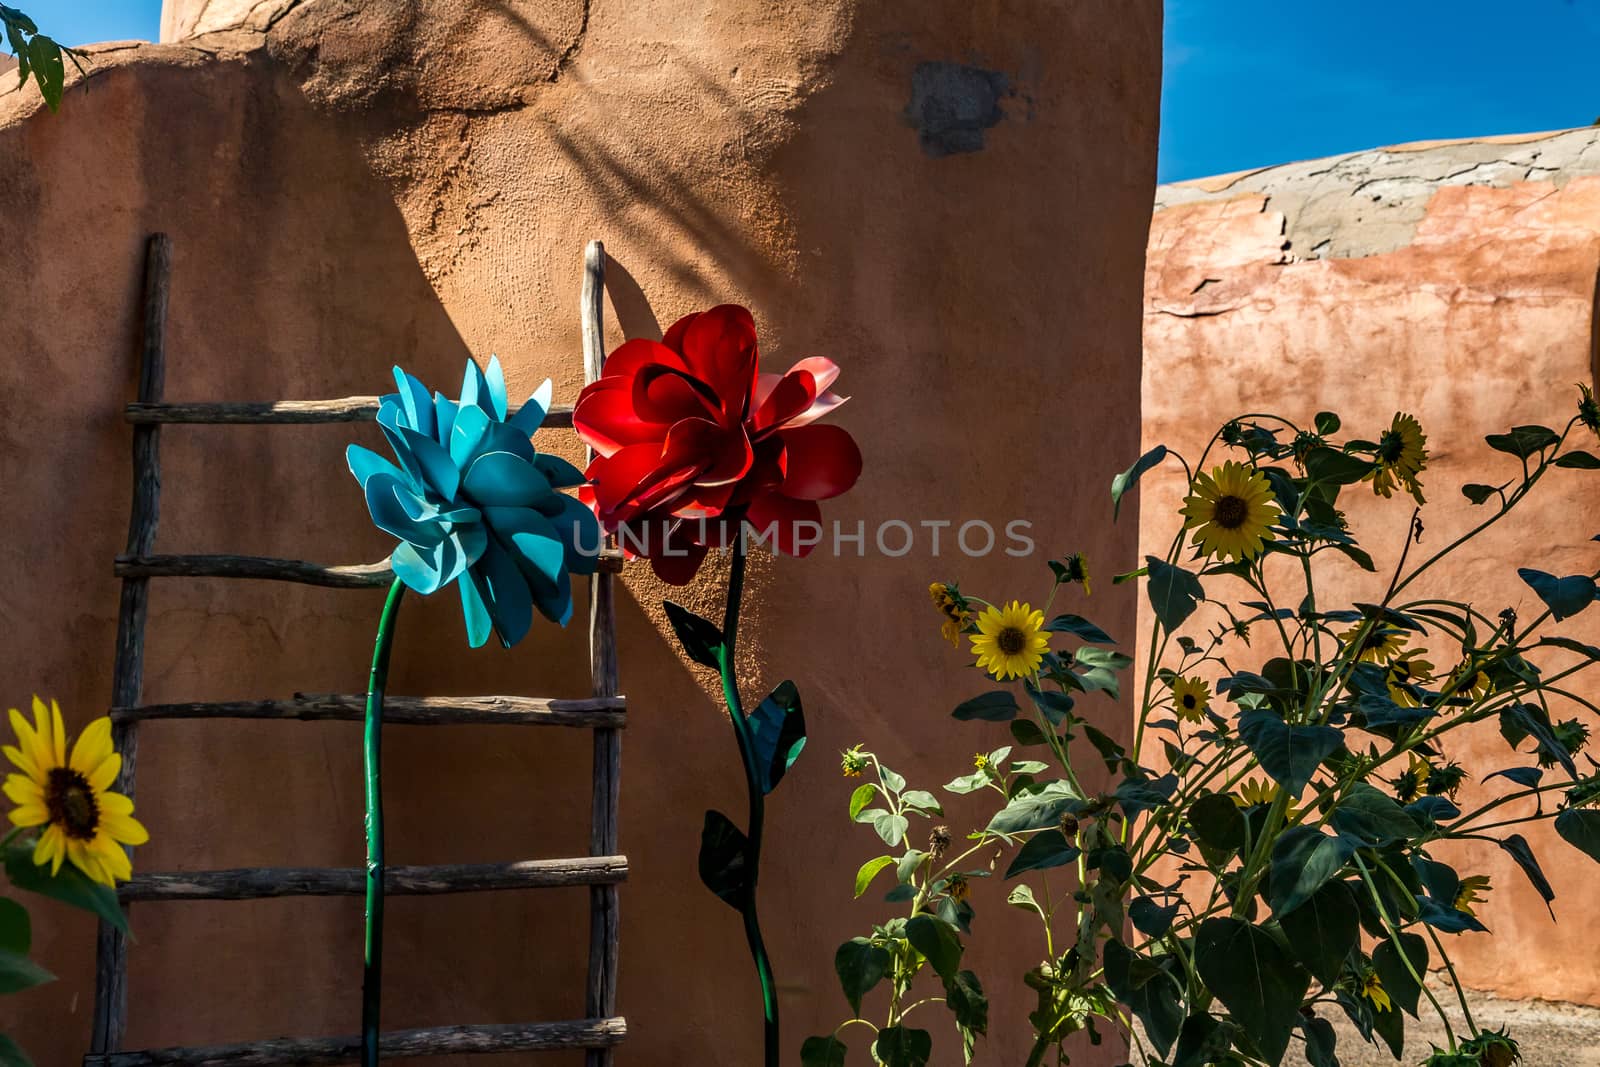 A kiva ladder and a mixture of real and artificial flowers decorate an adobe wall in Old Town, Albuquerque, New Mexico.